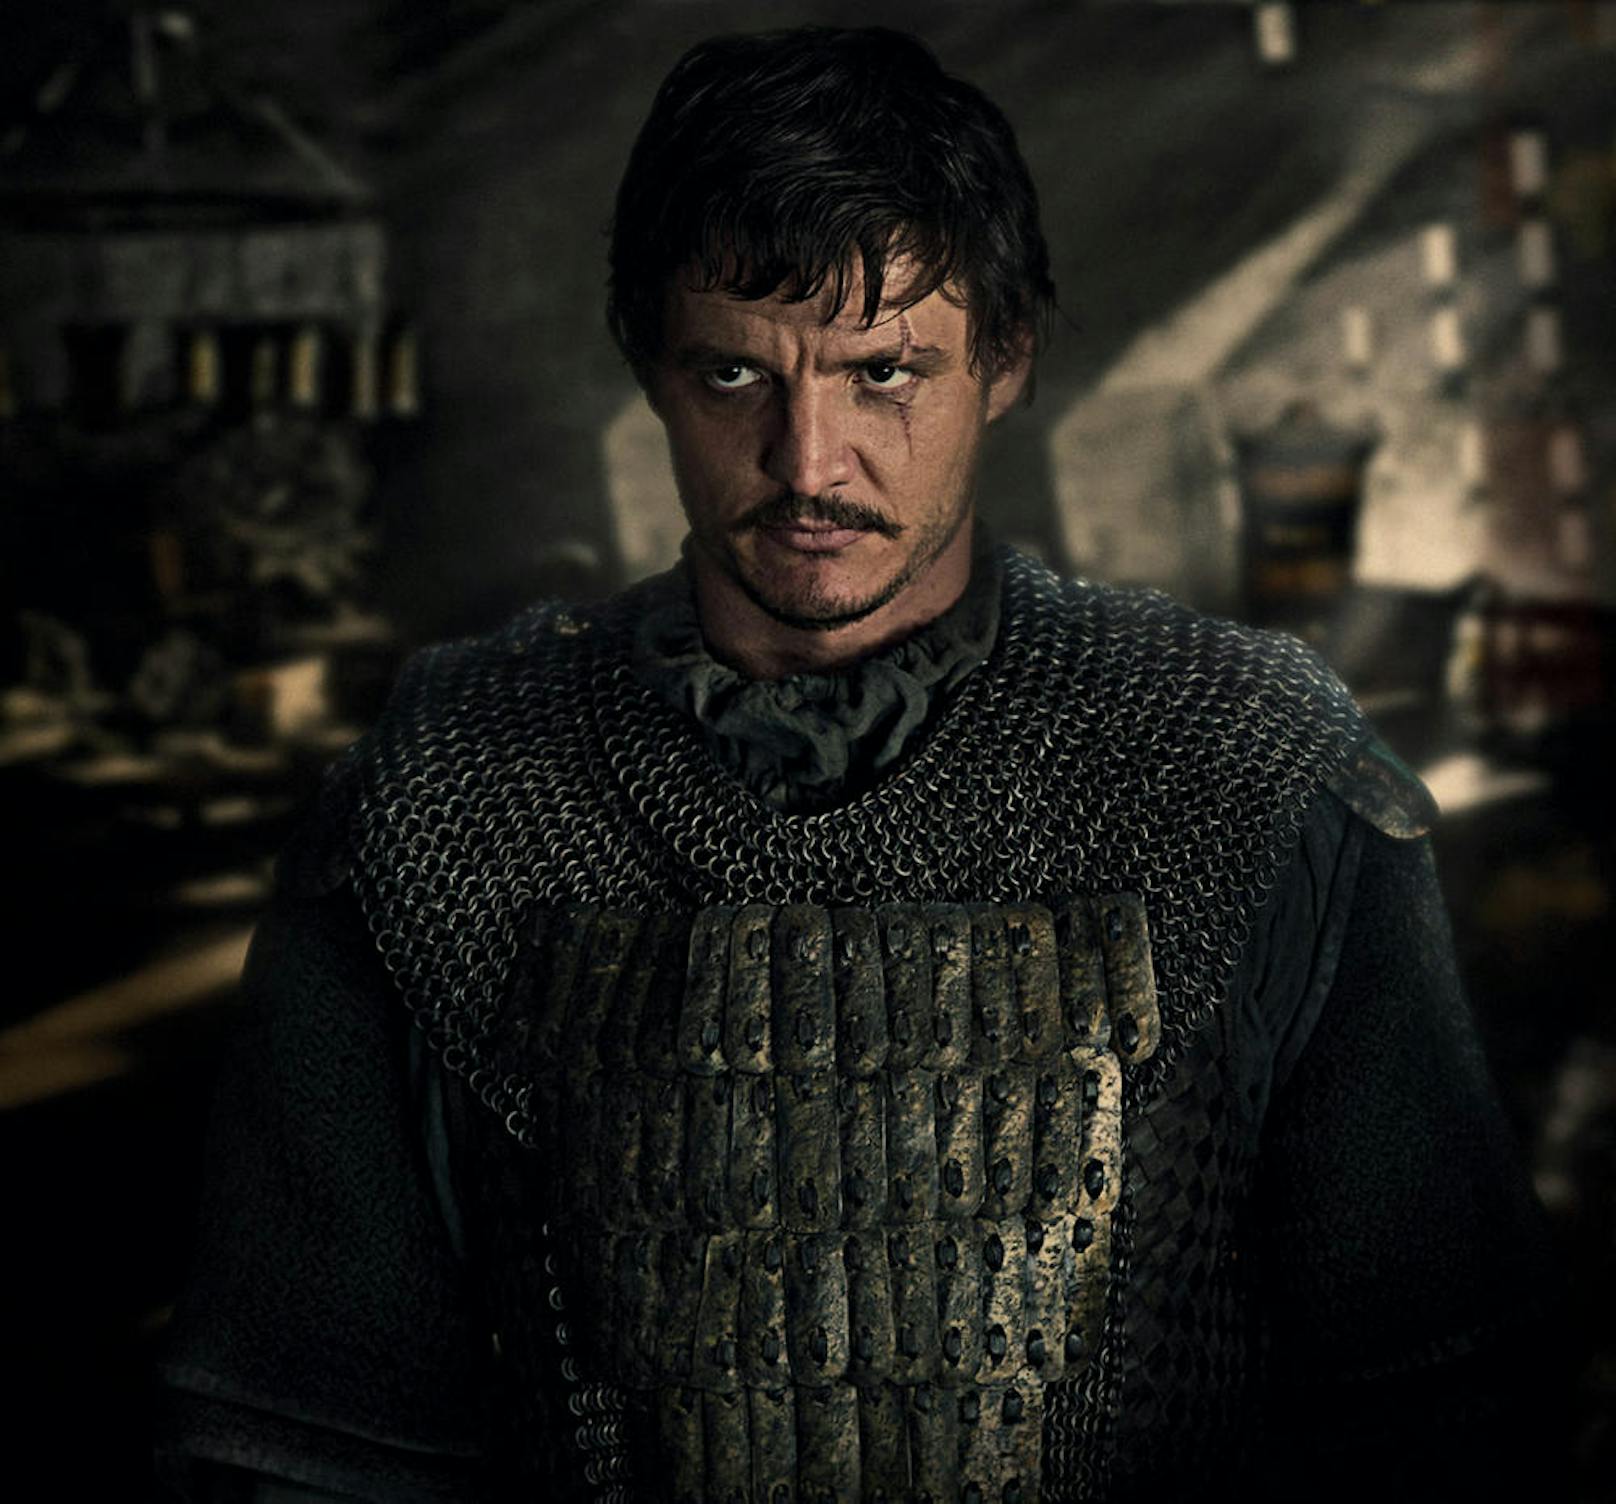 Pedro Pascal in "The Great Wall"